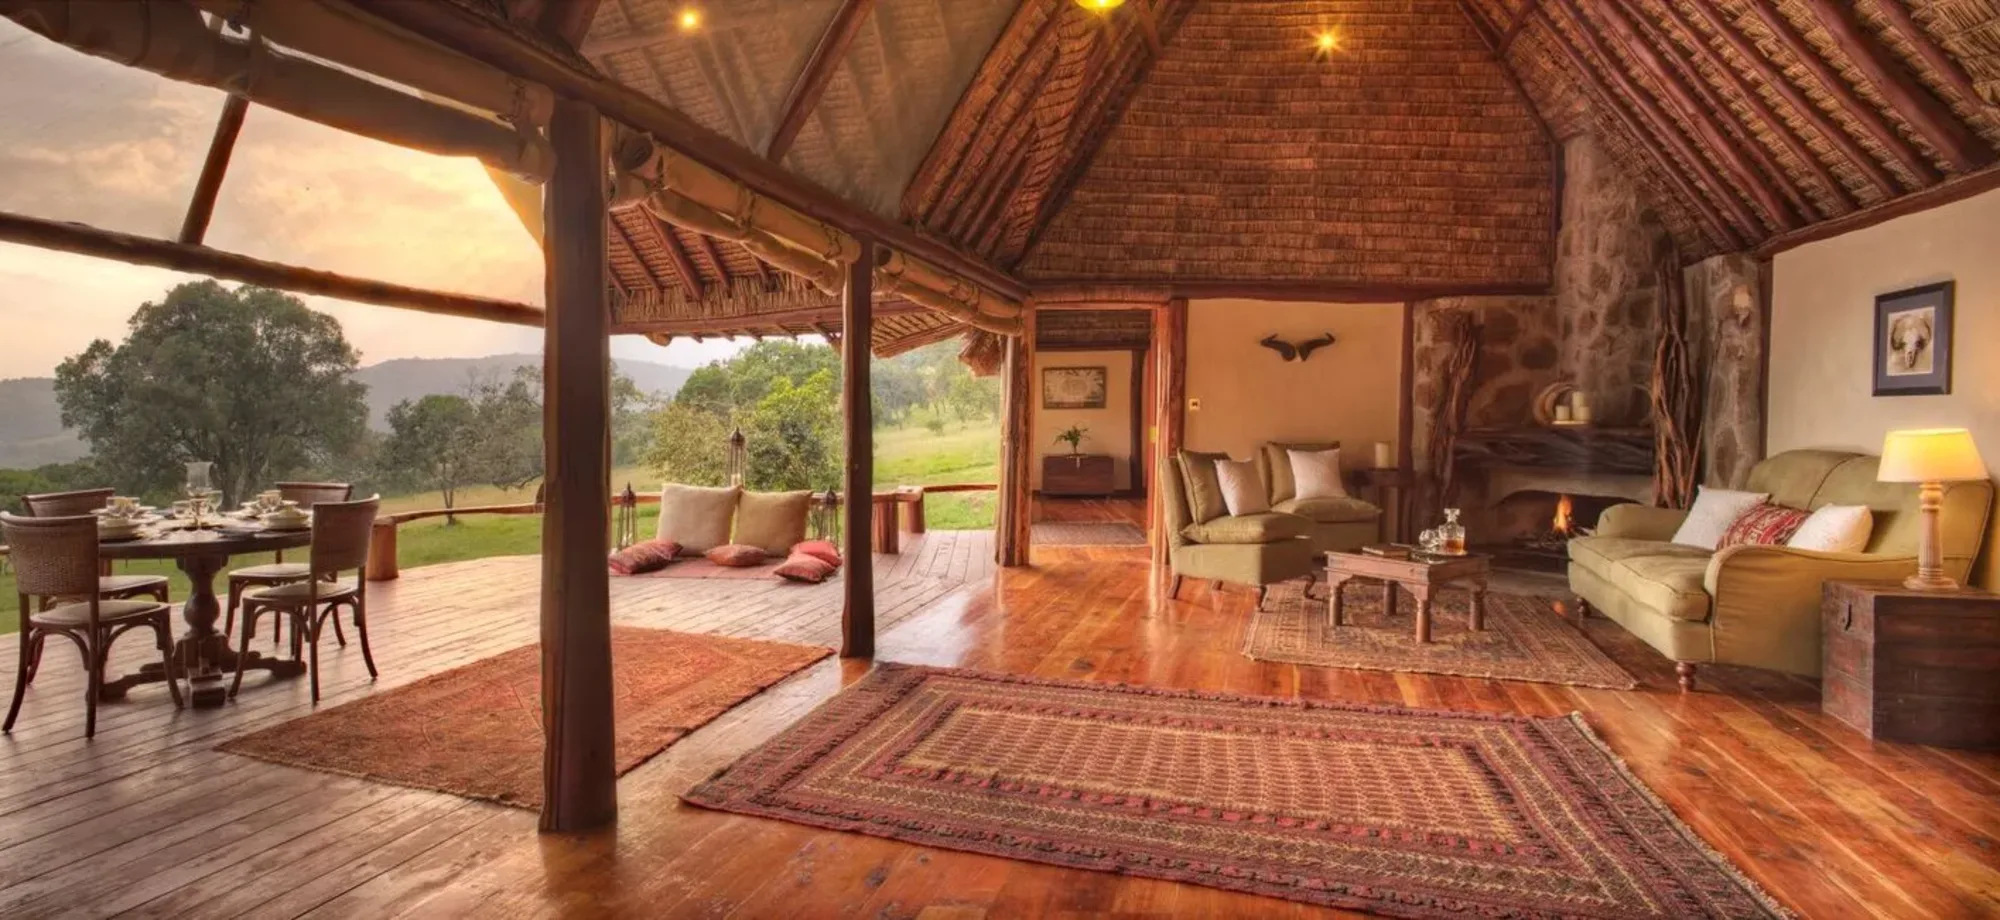 The Natural History Suite at Saruni Basecamp Mara has an indoor-outdoor plan with a viewing deck adorned with rugs and tables.